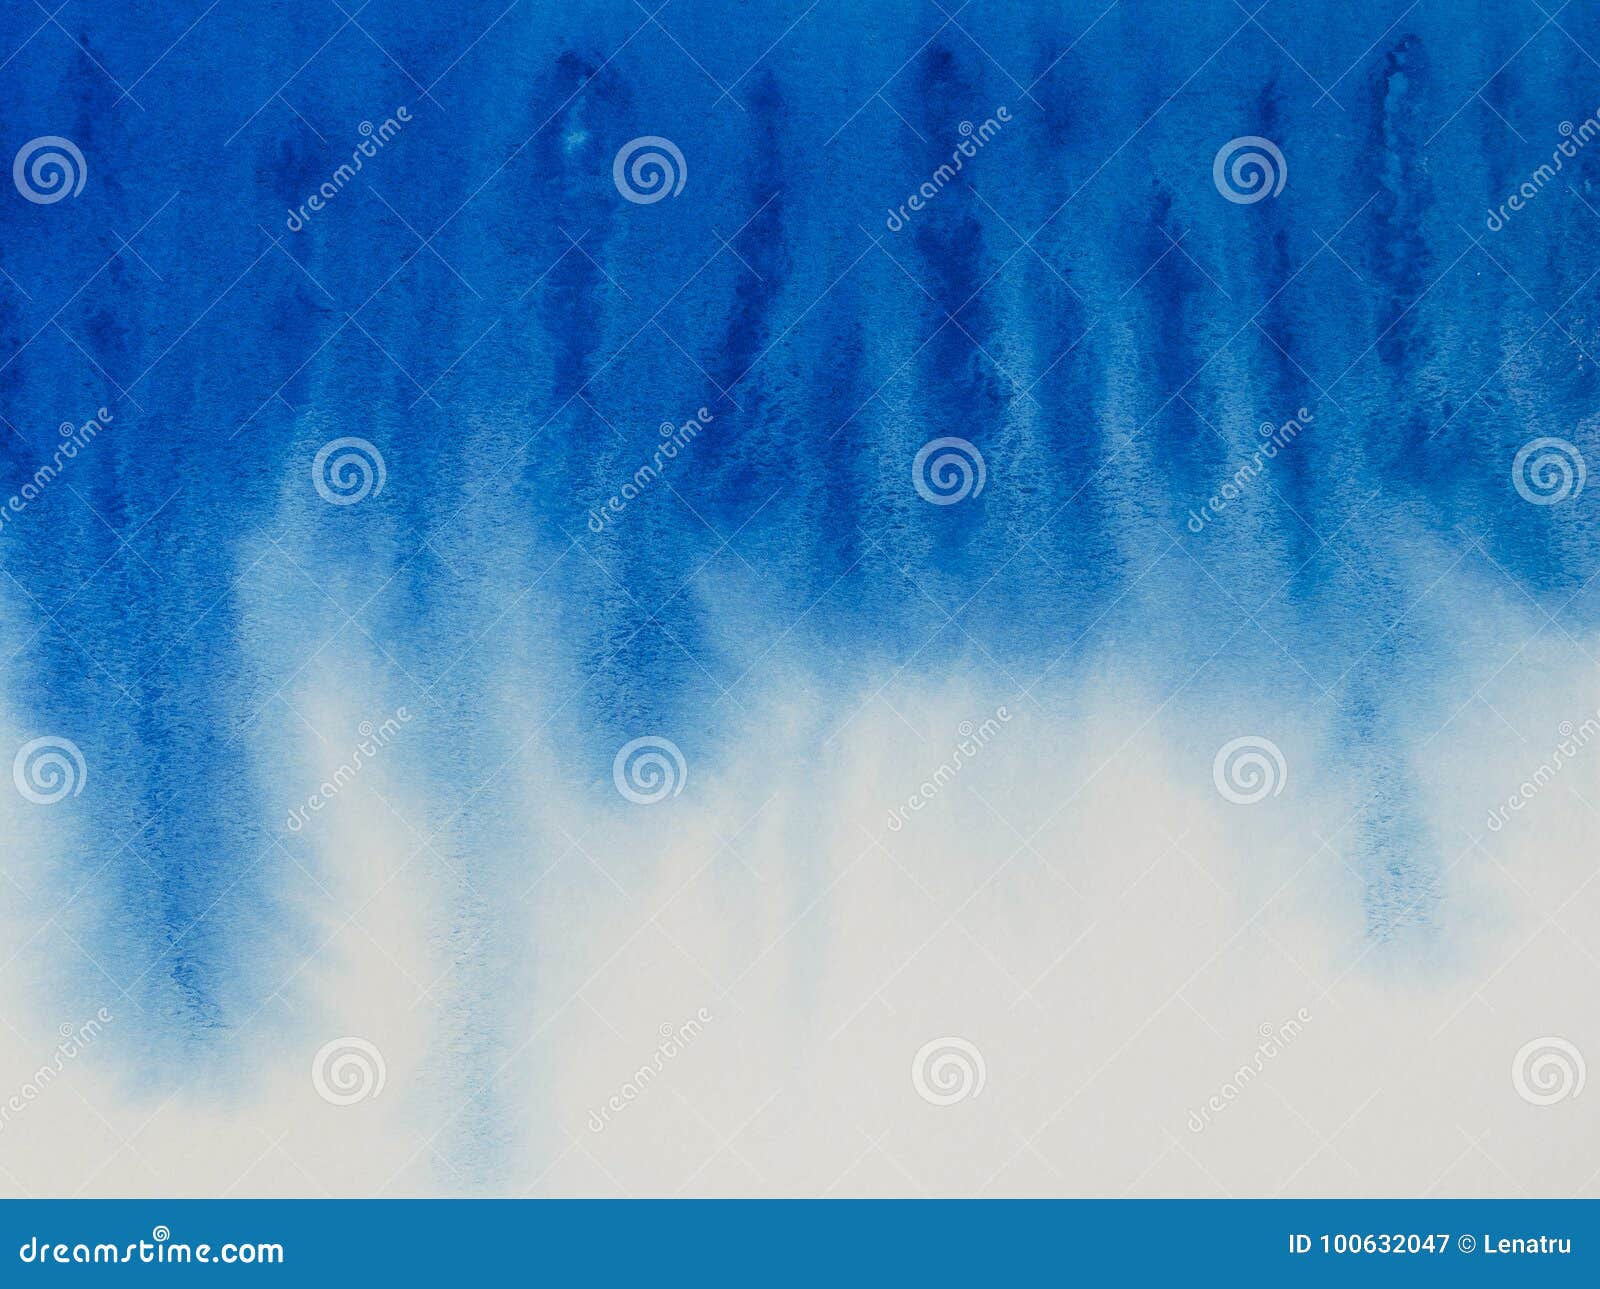 Abstract Dark Blue Watercolor Background Stock Illustration